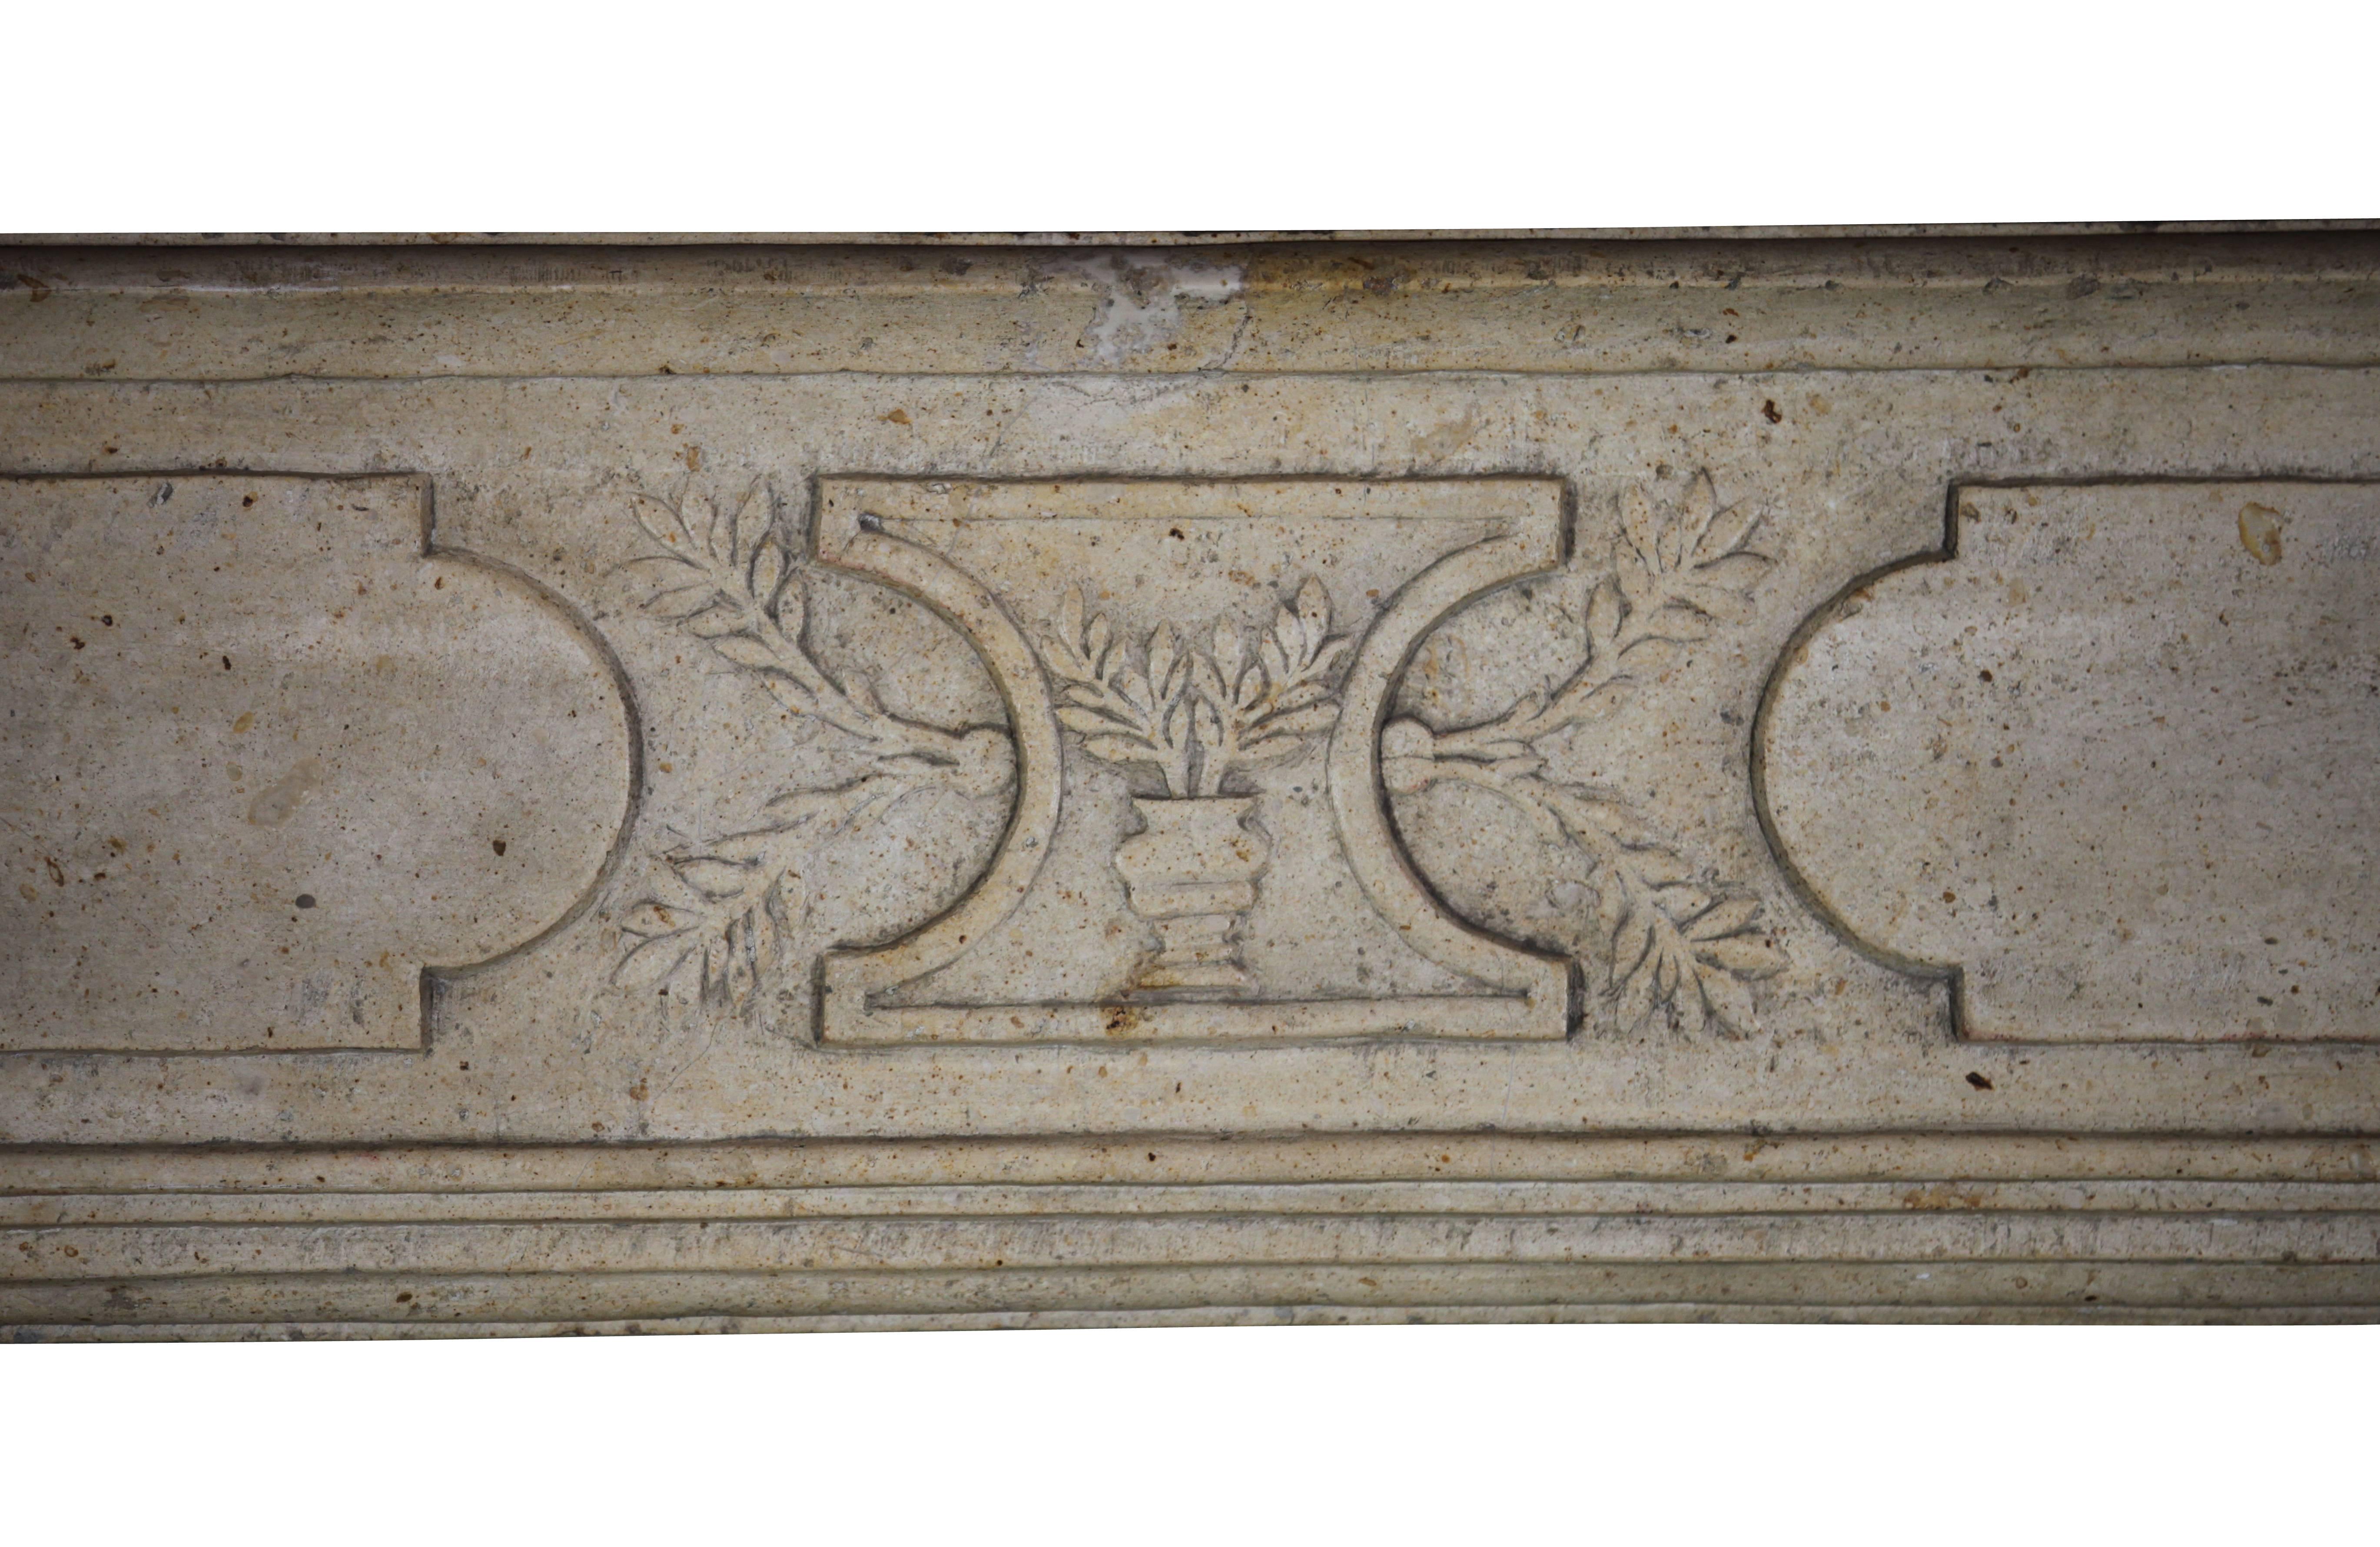 French country hard limestone fireplace mantel which is specially commissioned for a vigneron, a person who cultivates grapes for wine making. The hardness of the stone reflects the light in the room. This is a real eye-catcher for someone who loves